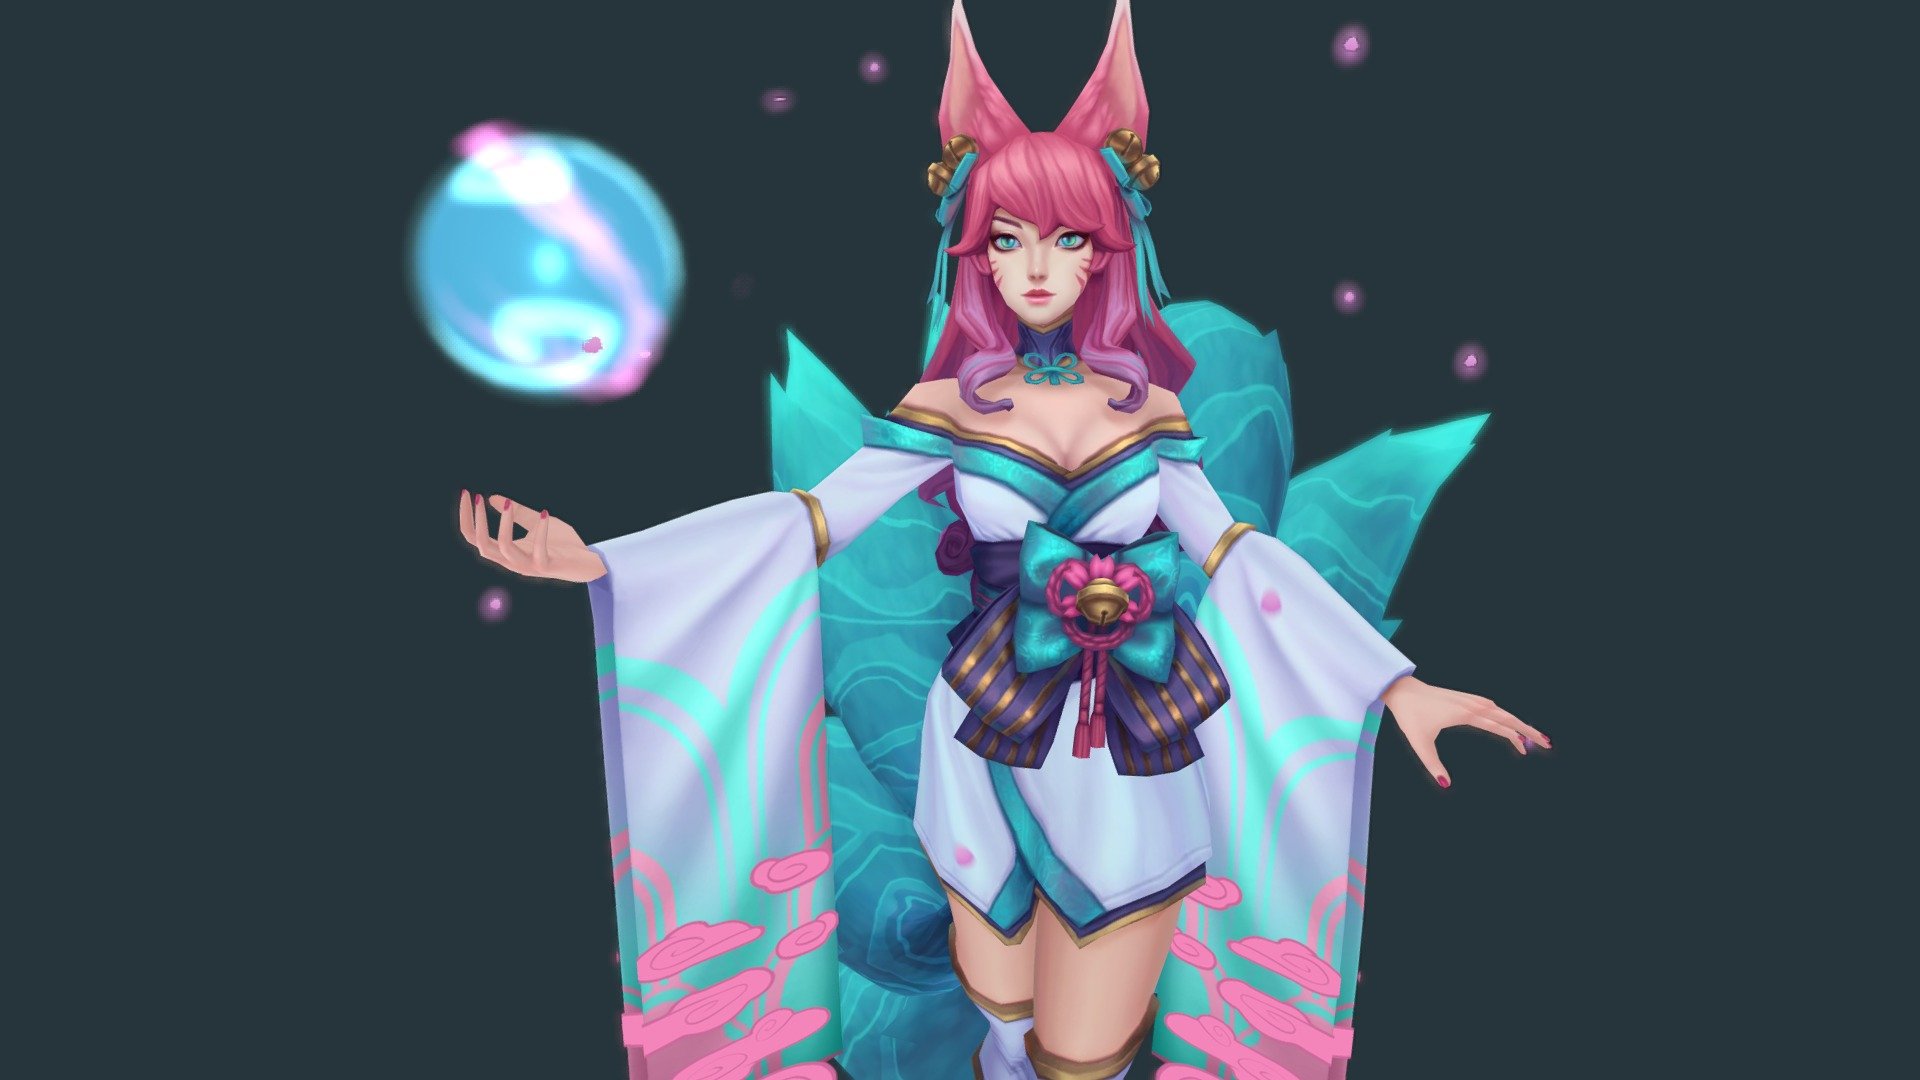 had the opportunity to work on one of my new favorite thematics, Spirit Blossom!
I was able to work on Ahri, all her forms, and her Chromas.
this was a massive team effort! 
ArtStation Link for shots

Orb made for post, main's vfx sleeves edited for post, pedestal made for post

Models/Textures/assisted with idle vfx: me
Concept: Oscar Vega https://www.artstation.com/raspbeary
Chroma Concepts: Oscar Vega and HK studio assisted
Tech Art: Omar Garcia https://www.artstation.com/riotcaptainog
VFX: Kelvin Huynh https://www.artstation.com/faybao
Animation:
Lana Bachynski https://www.artstation.com/latienie
Tyler Antony
Daniel Zettl 
Stephane Videlo https://www.artstation.com/svidelo
Audio: JP Aller
QA: Ian McNicol
Producer: Ambrielle Army
Splash: Jeremy Anninos https://www.artstation.com/anninosart
Narrative: Daniel Couts
Art Director: Jon Buran https://www.artstation.com/jonburan - Spirit Blossom Ahri - 3D model by ybourykina 3d model